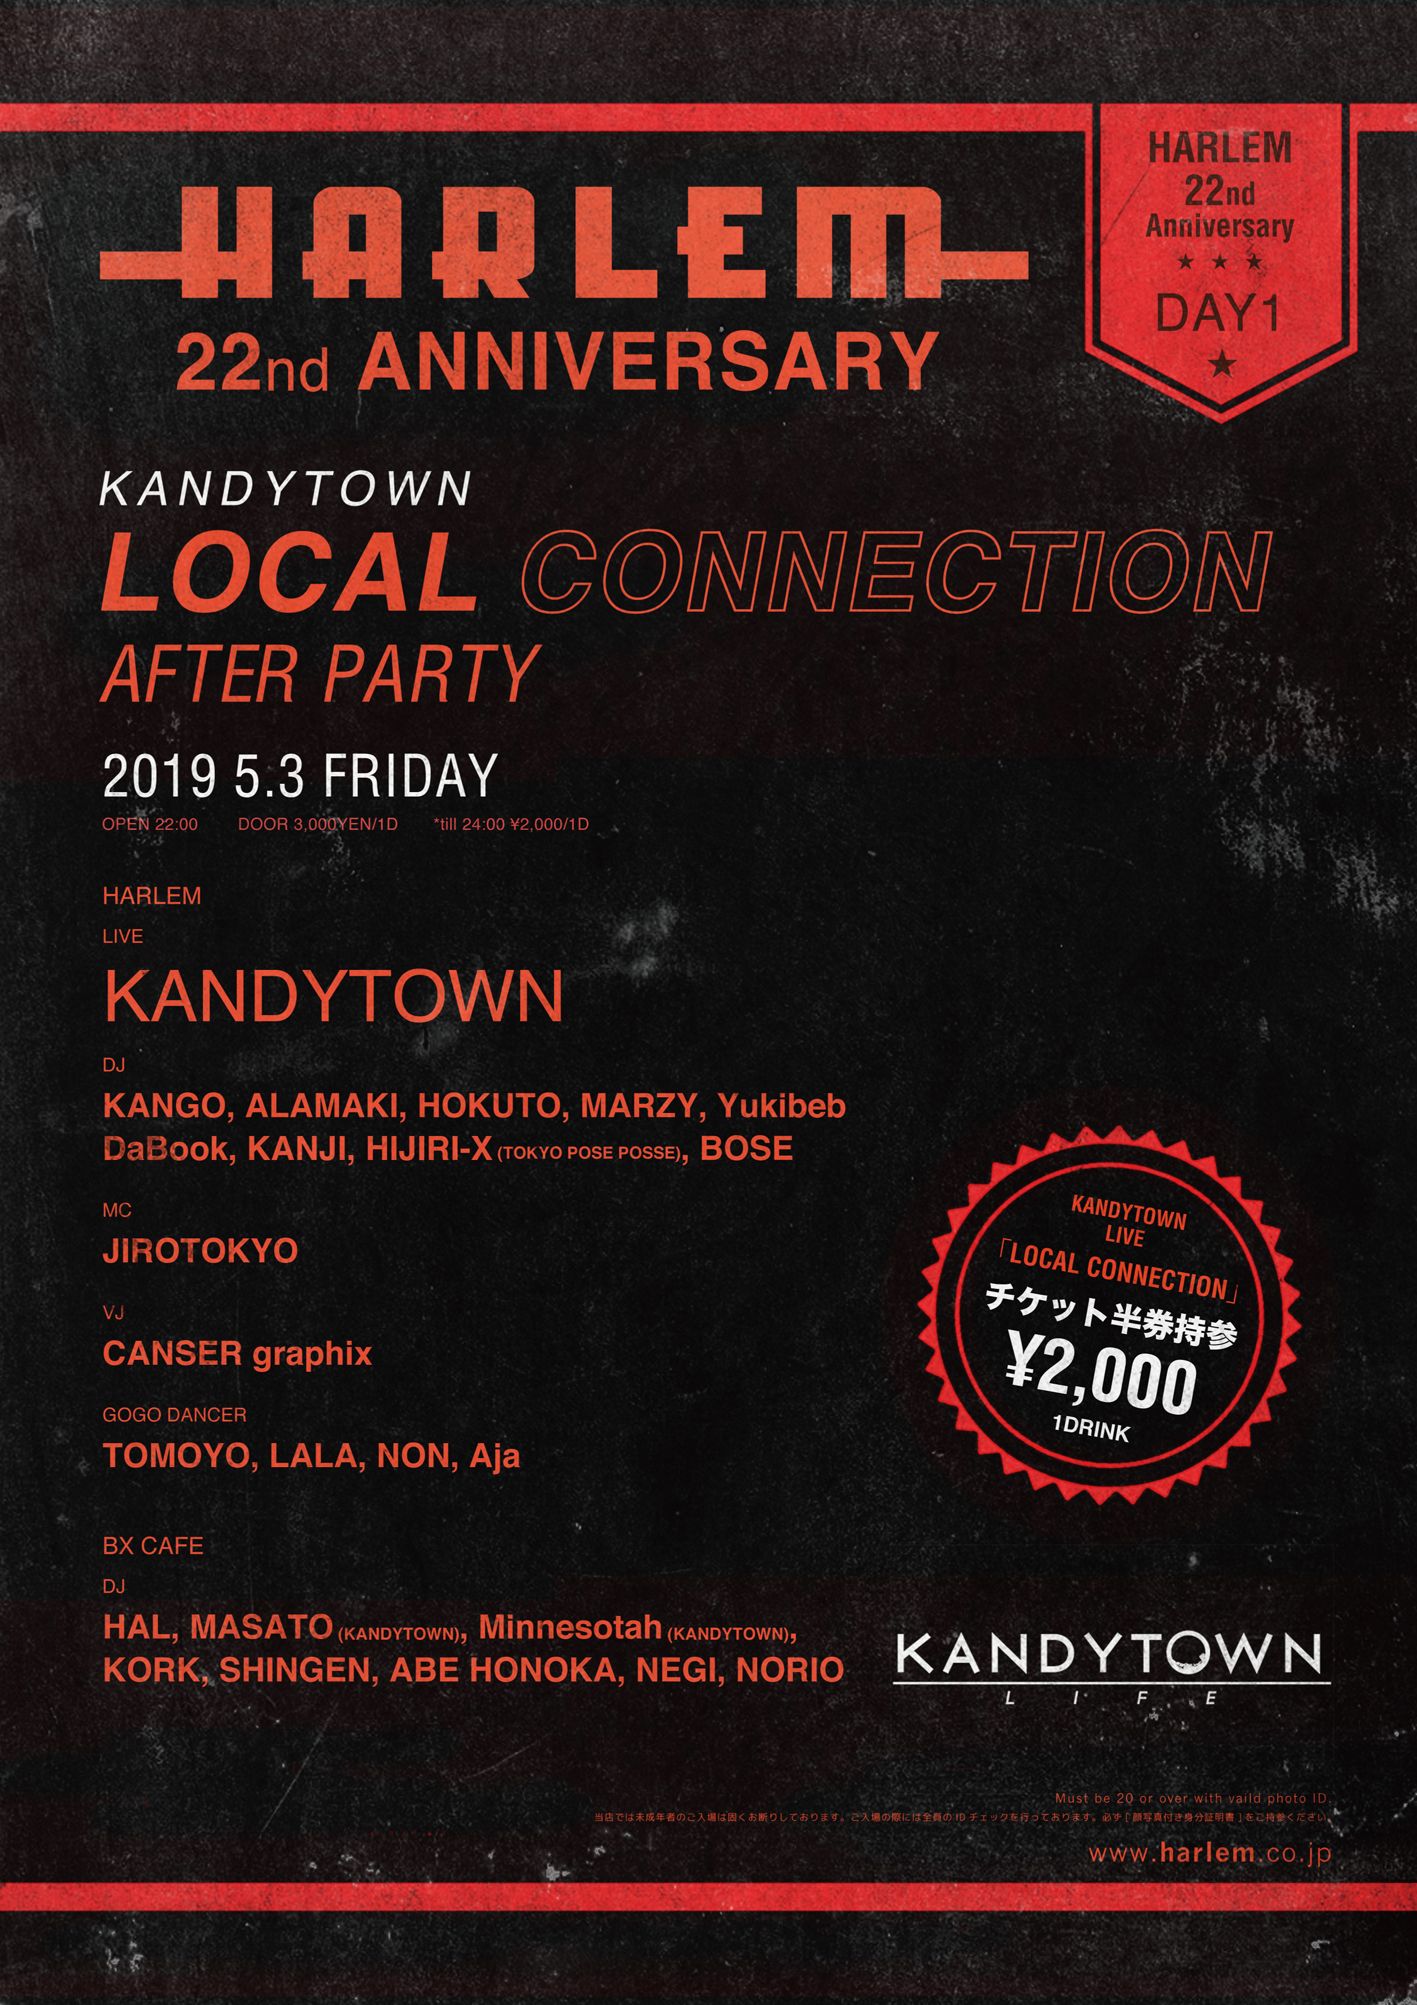 HARLEM 22nd ANNIVERSARY DAY1 - KANDYTOWN "LOCAL CONNECTION" AFTER PARTY-